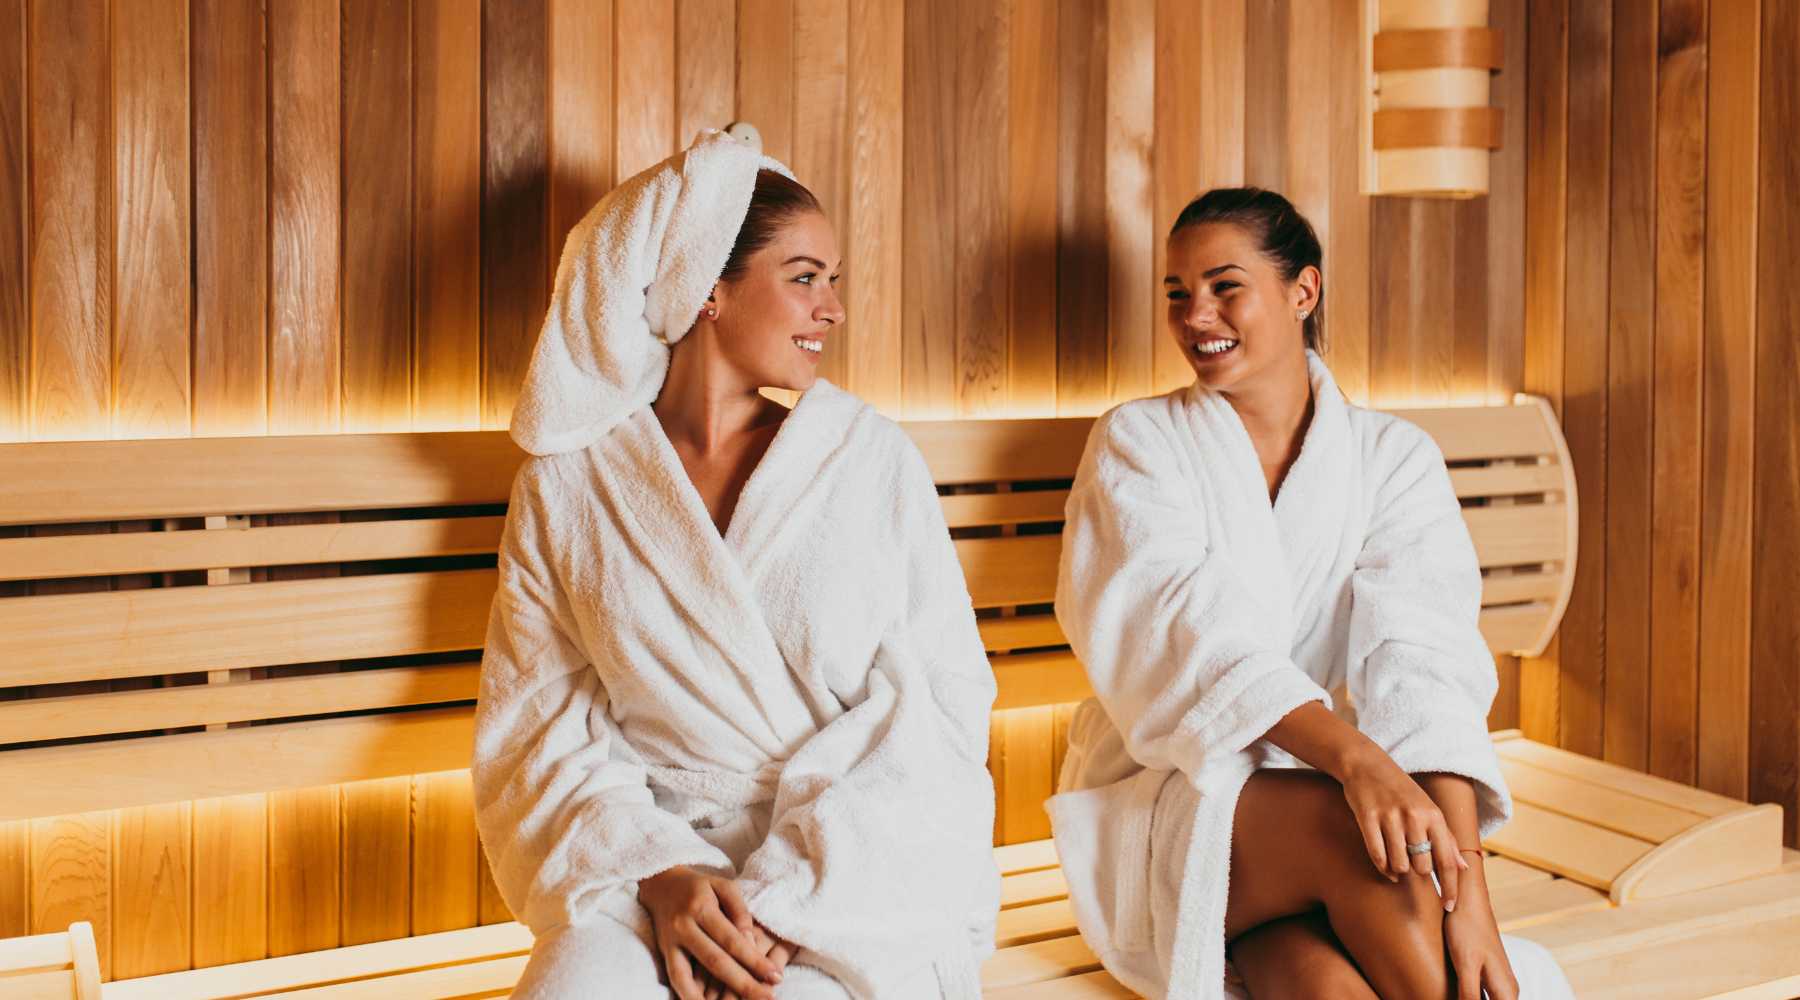 Infrared Sauna Tips to Maximize the Benefits of Your Session